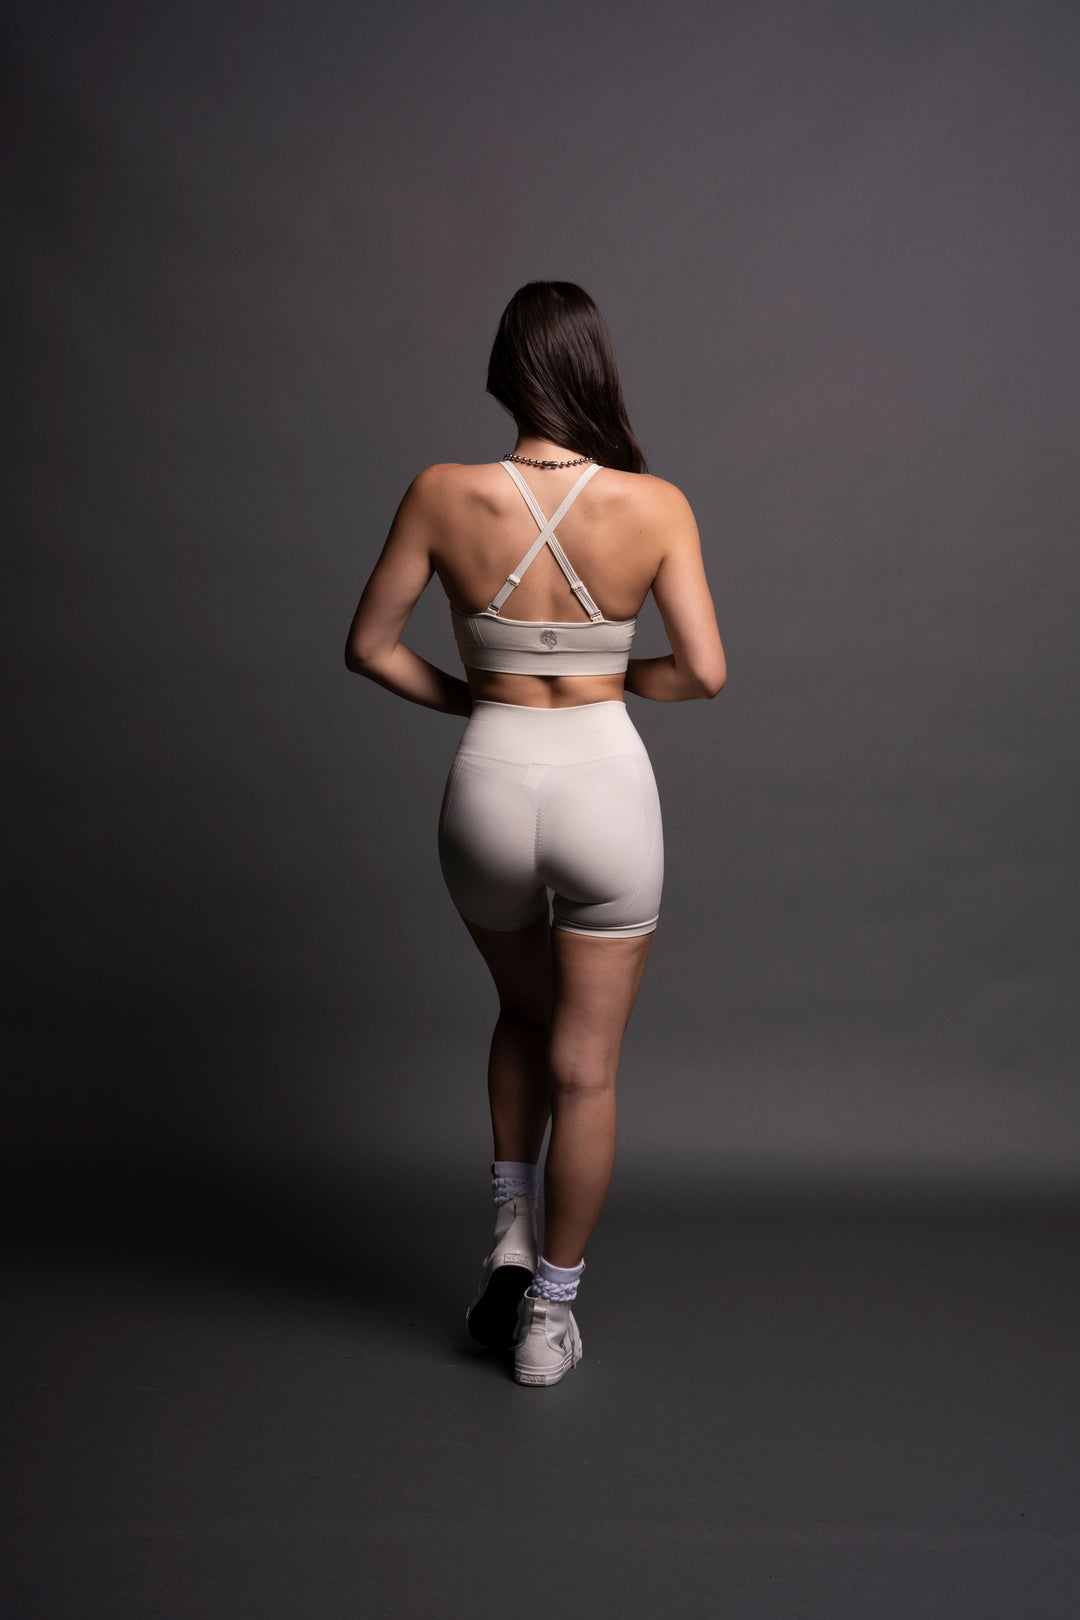 Our League "Everson Seamless" High Neck Bra in Sand